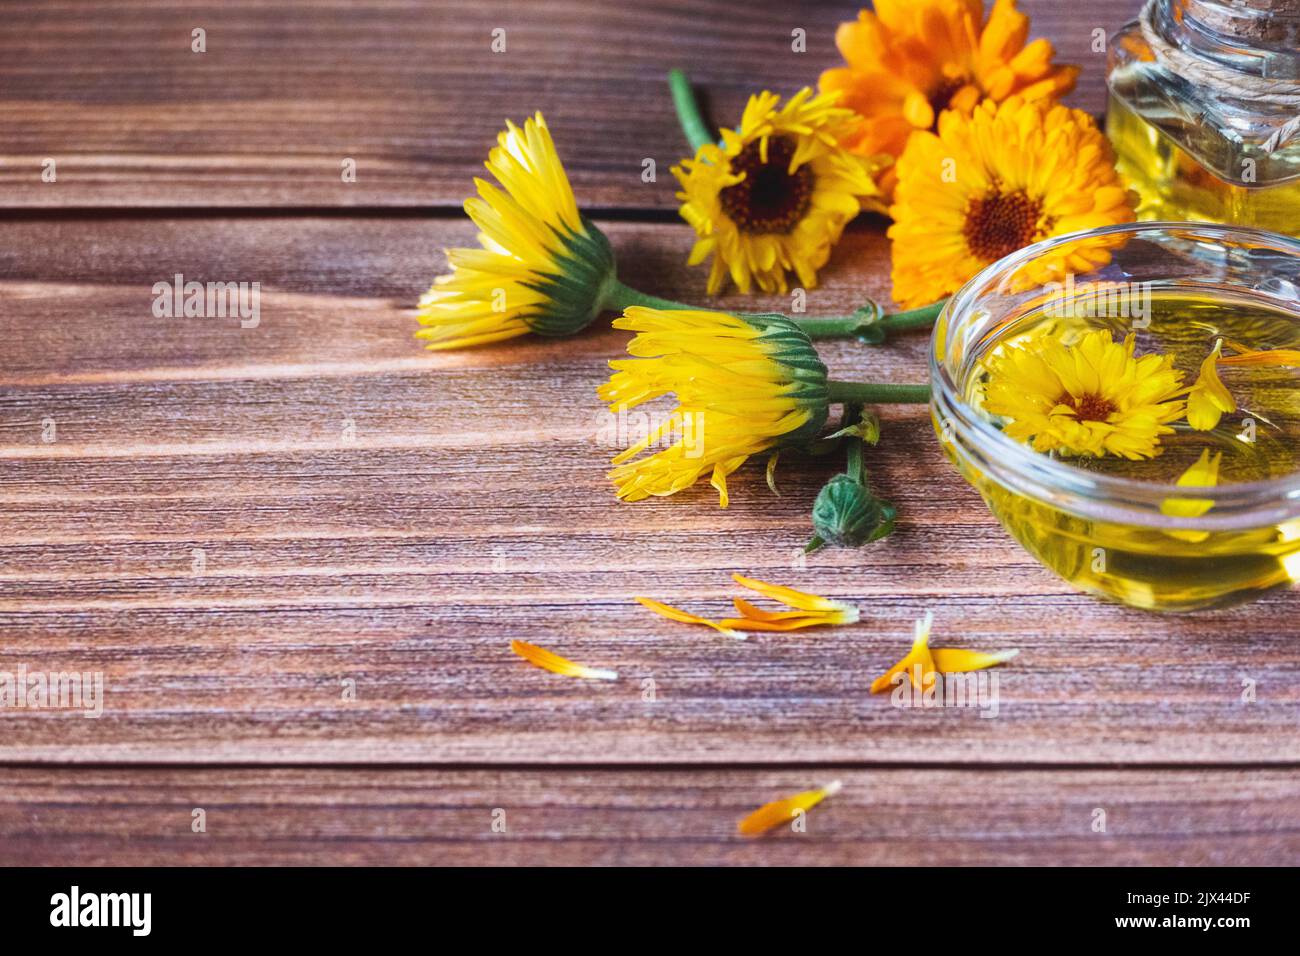 Calendula herbal infused oil made of Calendula officinalis flowers on wooden background, copy space Stock Photo